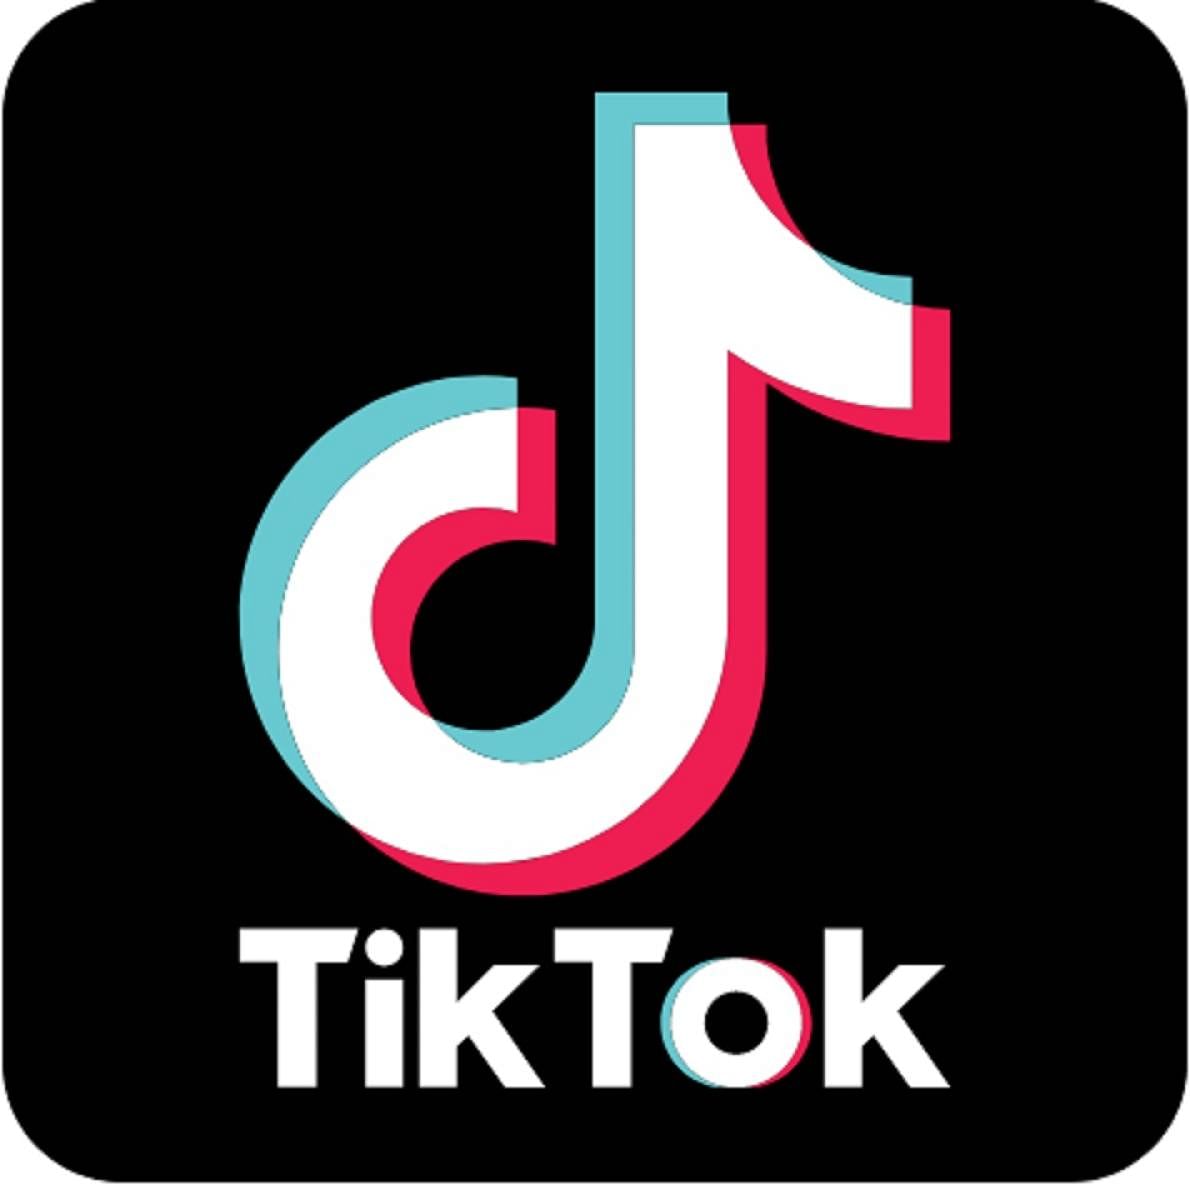 ByteDance Ltd., an innovative Beijing startup that created the hit video app TikTok, is moving into search in a threat to the advertising business (DH Photo)